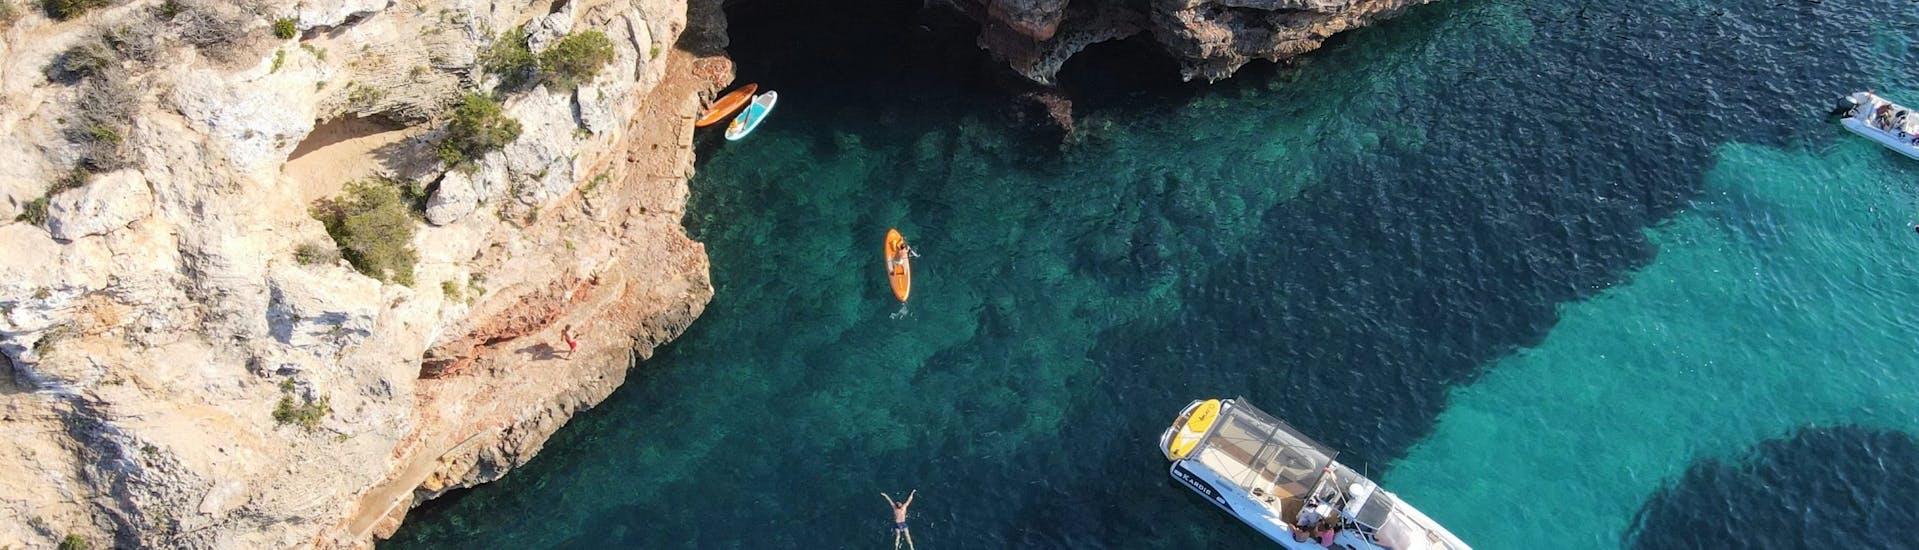 Private Boat Trip with Snorkeling cruising Ibiza to S'Empalmador & Es Pujols with Eiviboats.